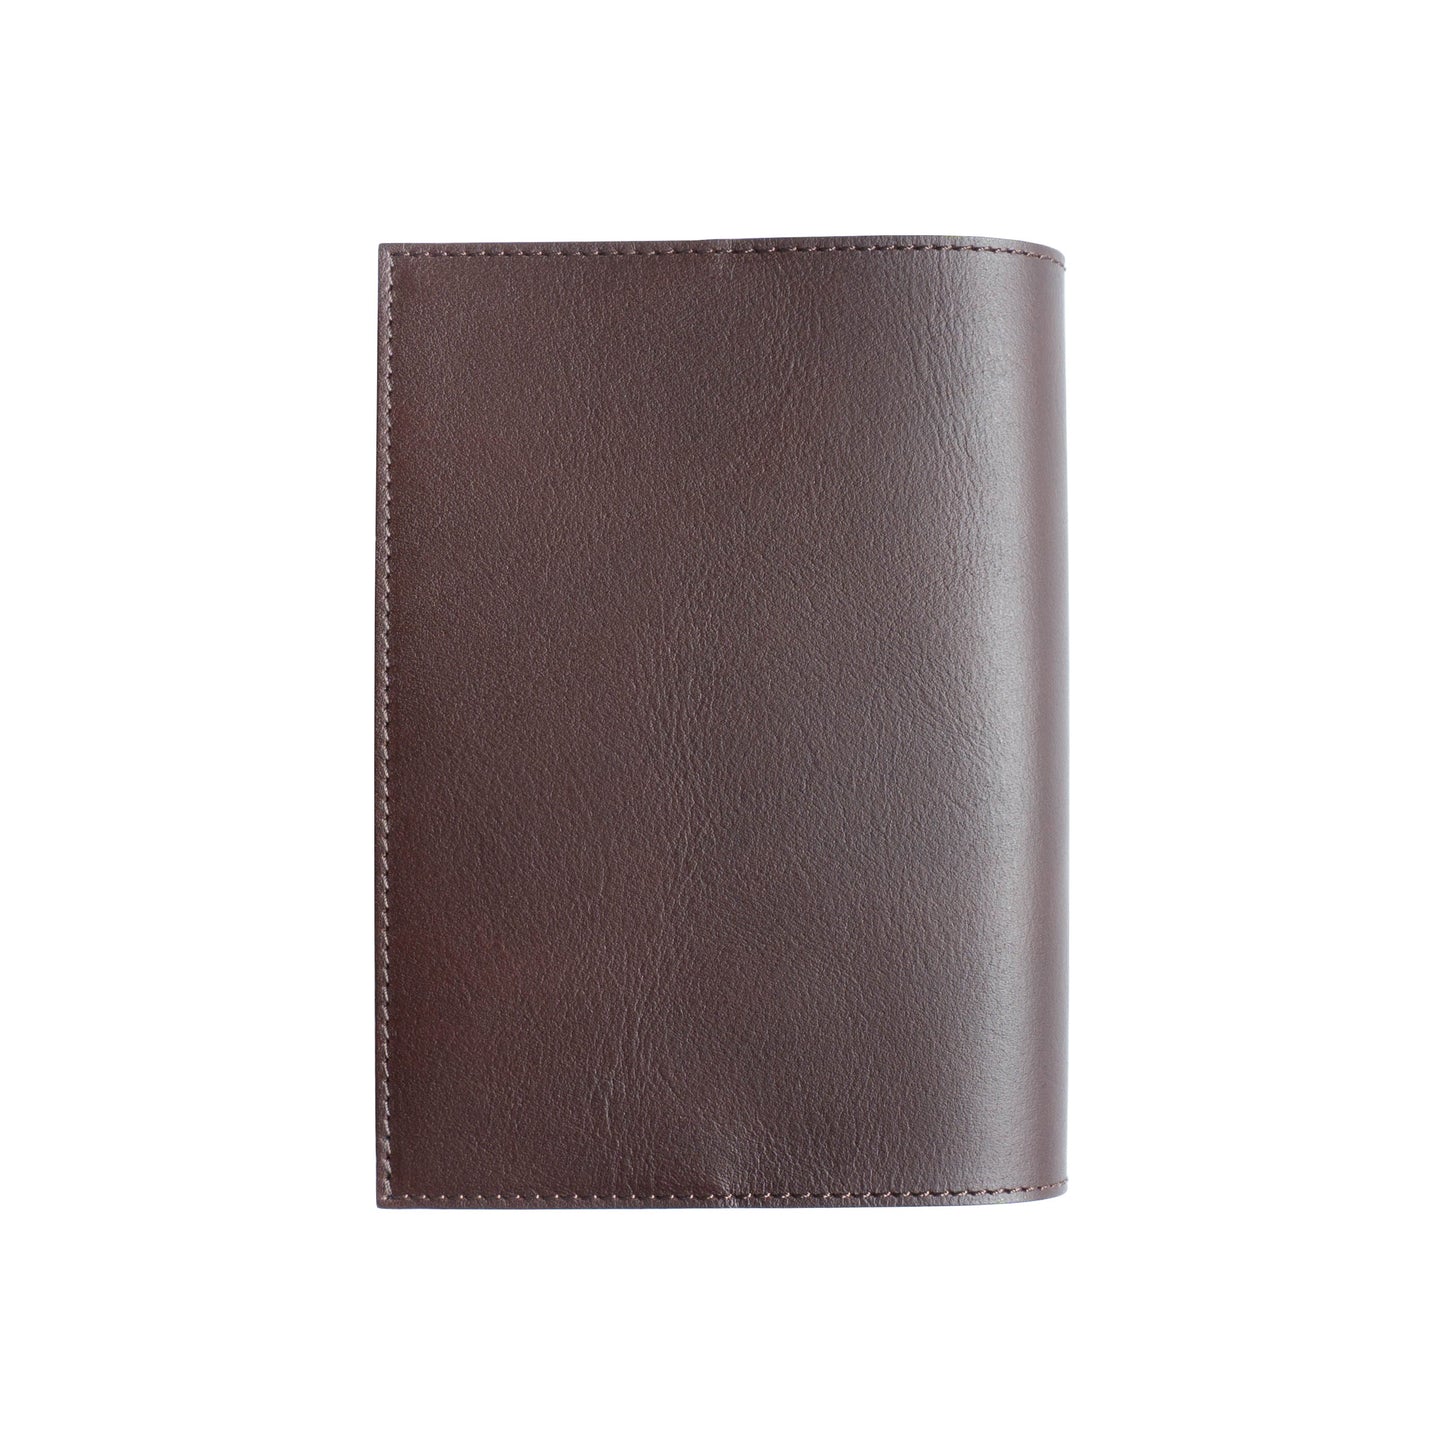 C&amp;L TRASCO ≪Zeaba Series≫ Book Cover A6/Paperback Size Genuine Leather (Antibacterial Processed Leather)